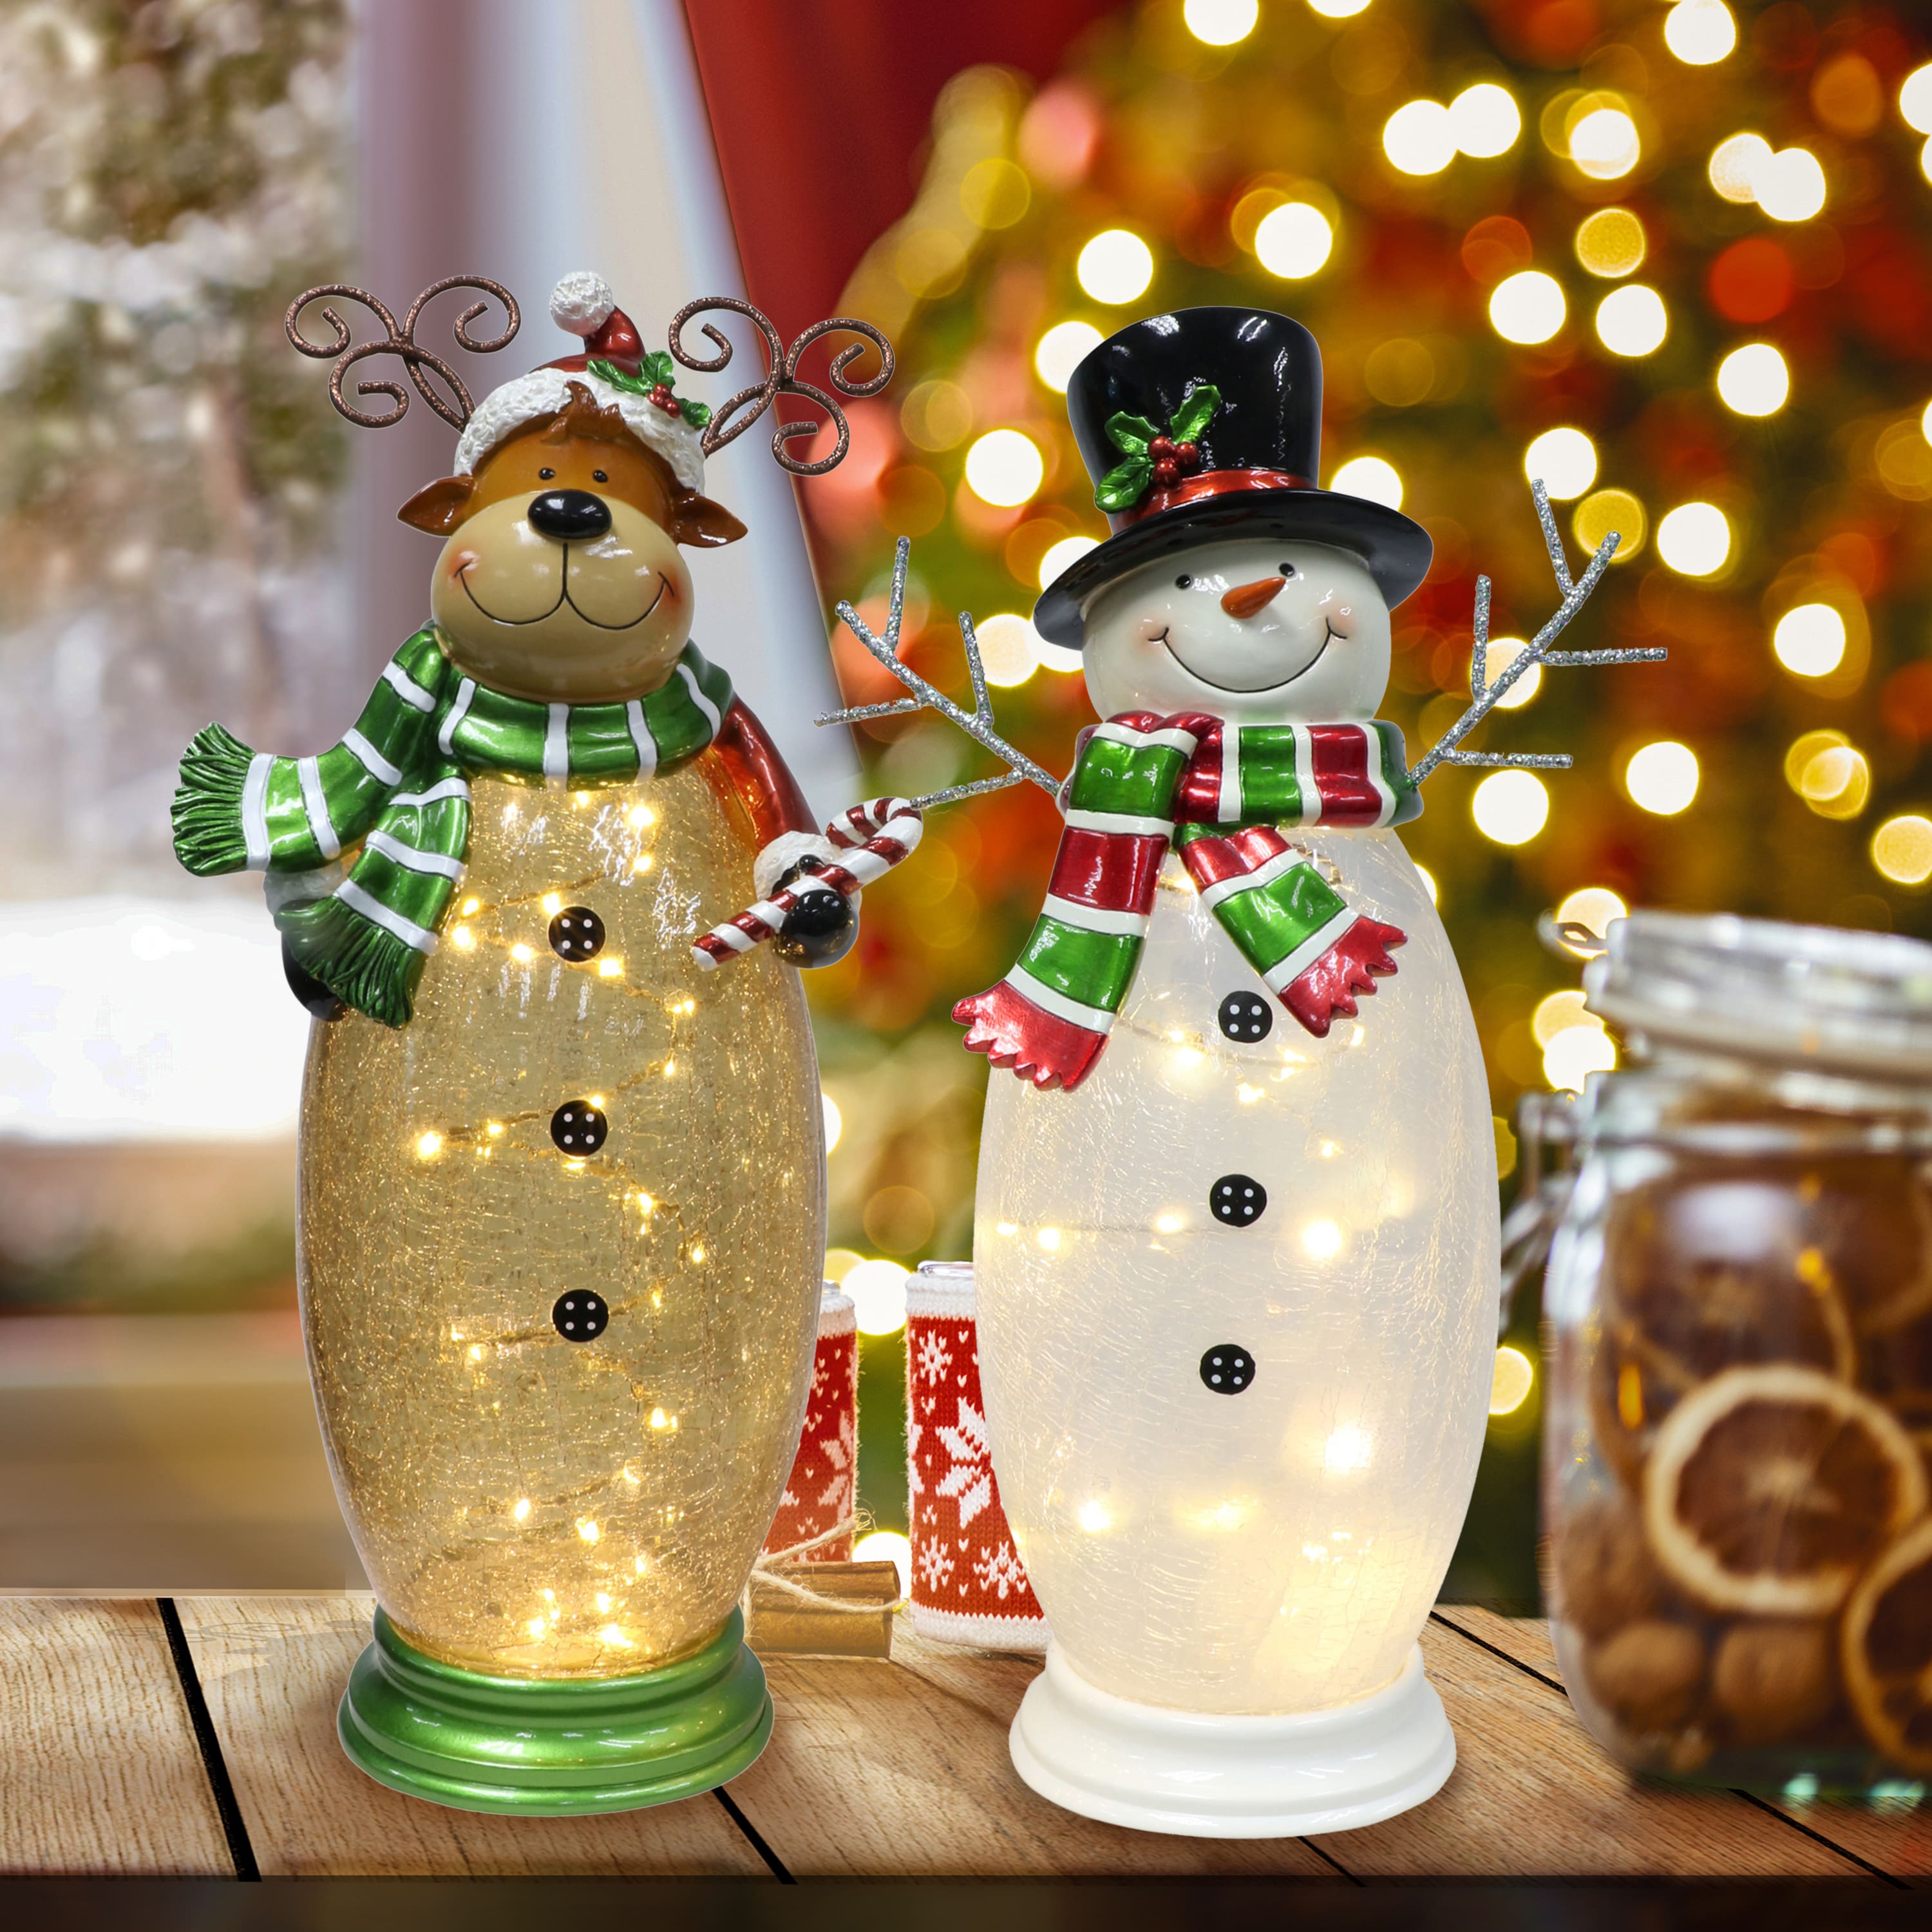 VP Home Christmas Crackled Glass LED Holiday Light Up Christmas Snowman Lighted Decorations